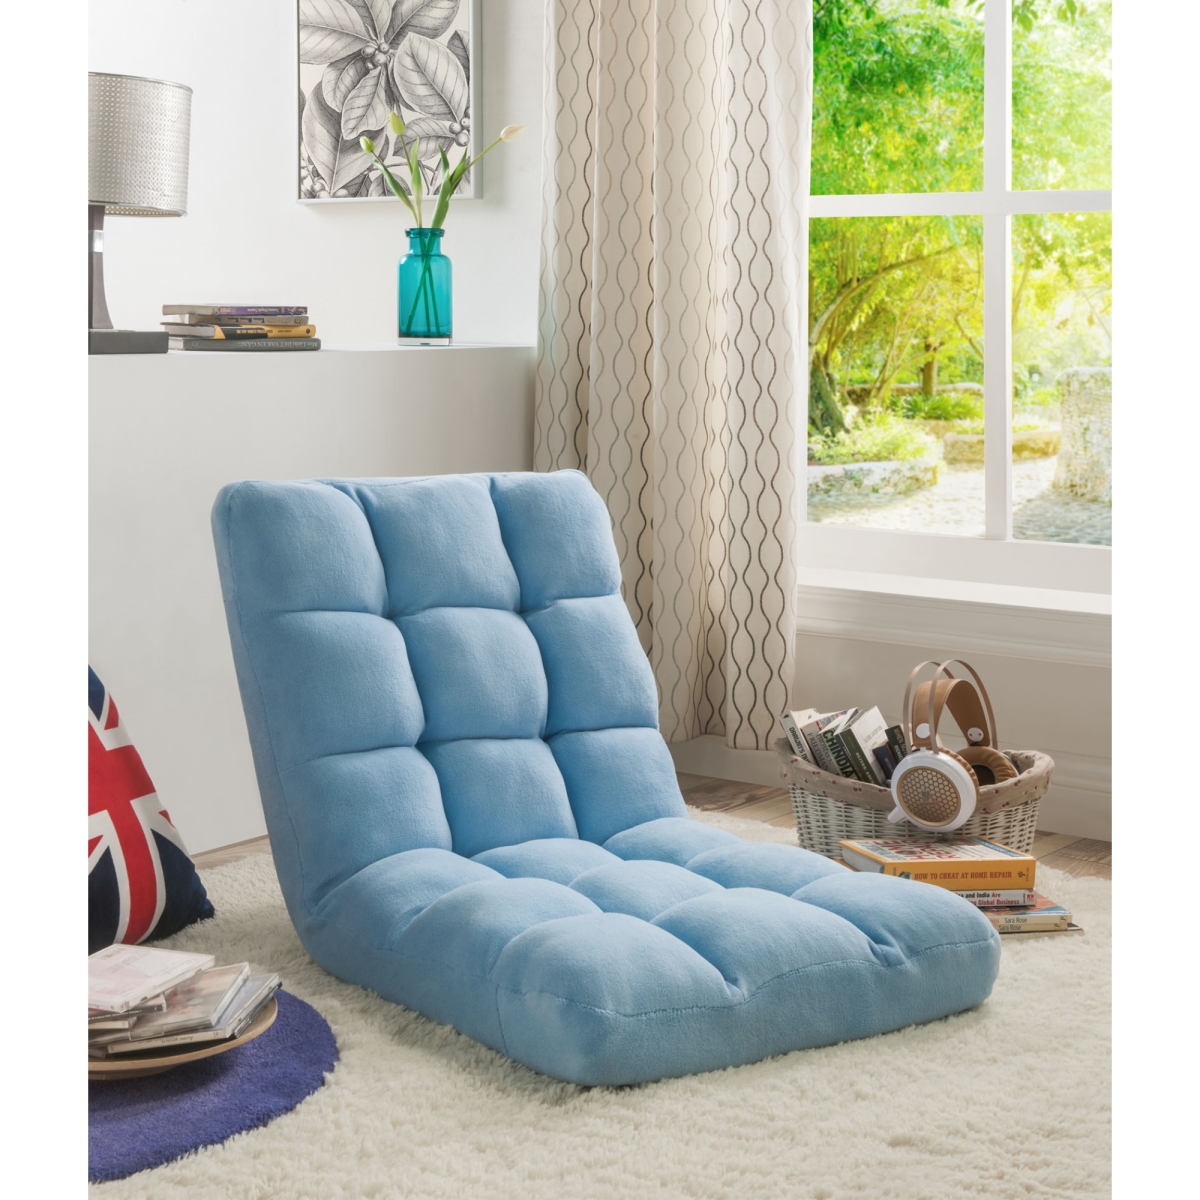 Microplush Modern Armless Quilted Recliner Chair With Foam Filling And Steel Tube Frame - Blue